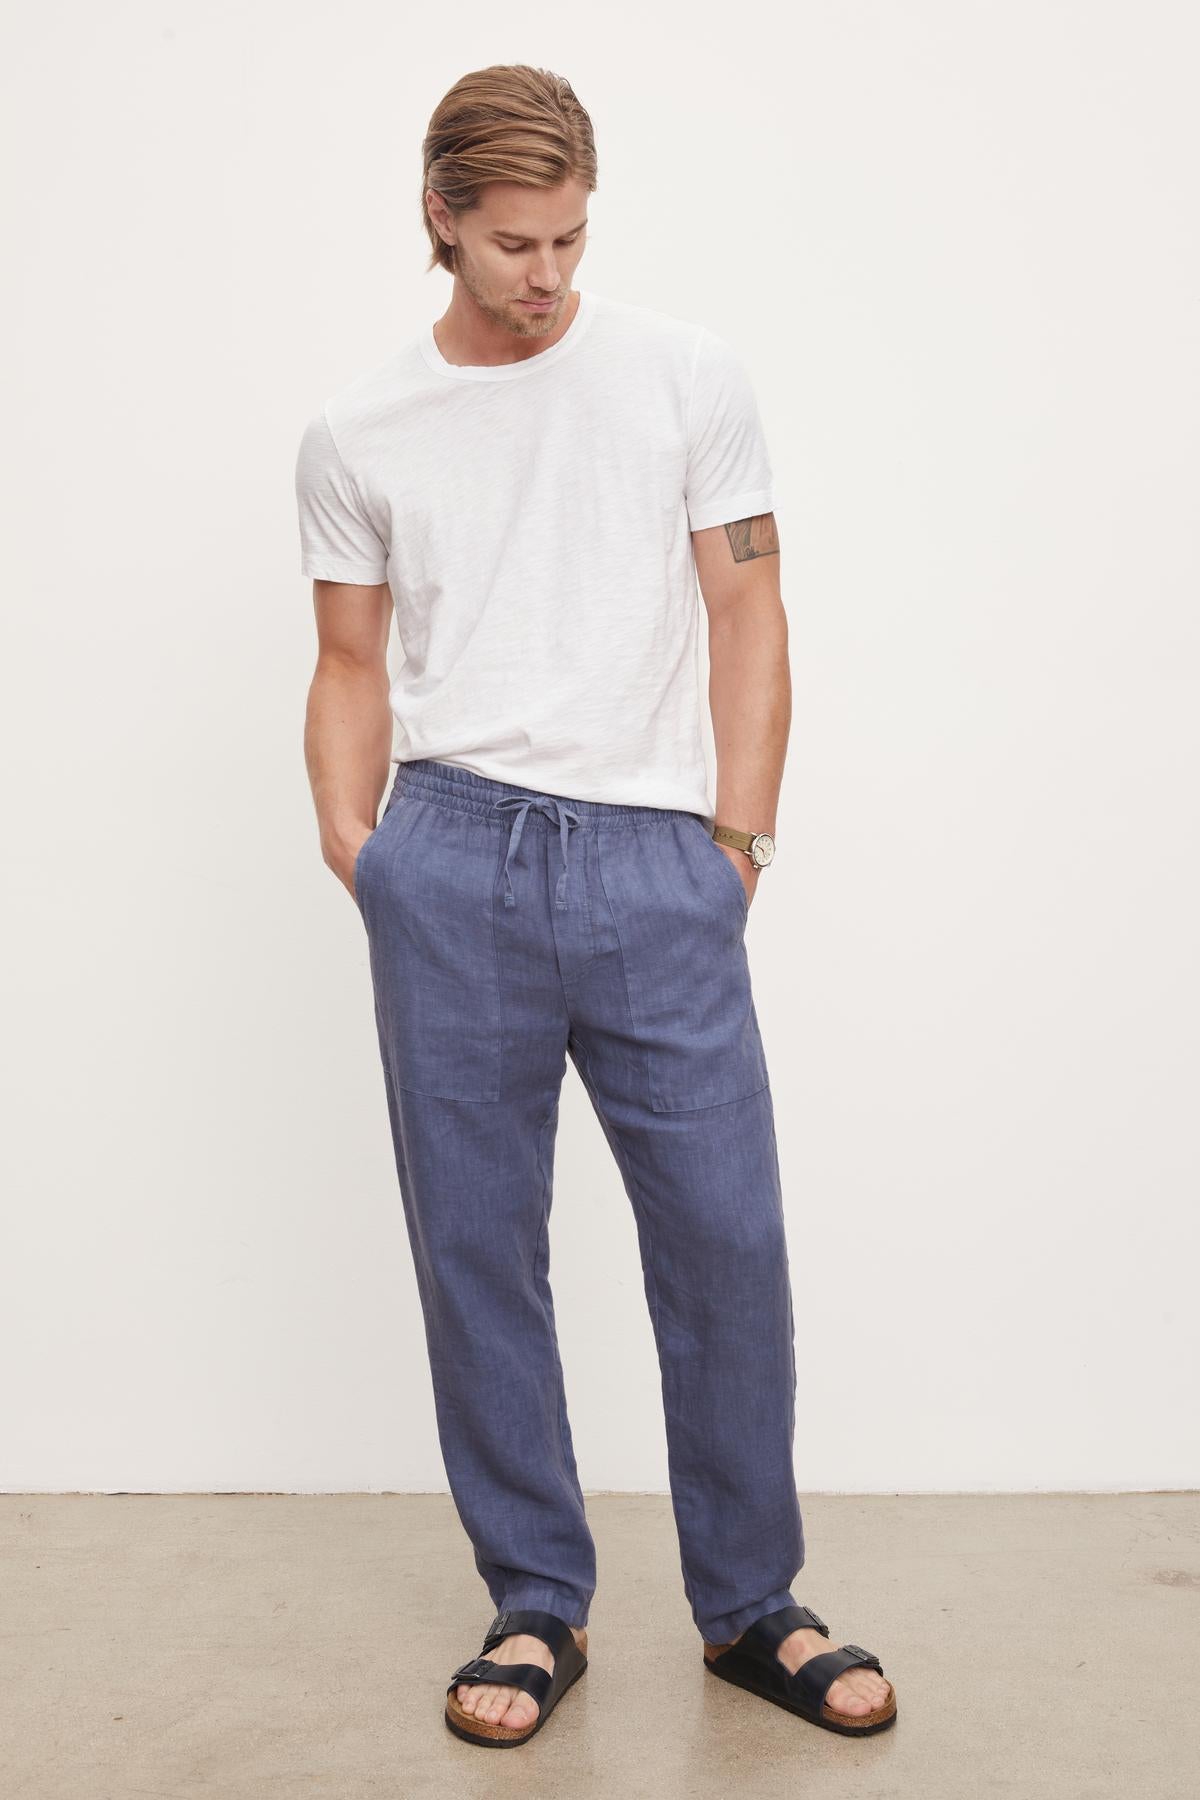 A man wearing a white t-shirt, Velvet by Graham & Spencer blue Phelan linen pants, and black sandals stands looking down, against a plain background.-36805503385793